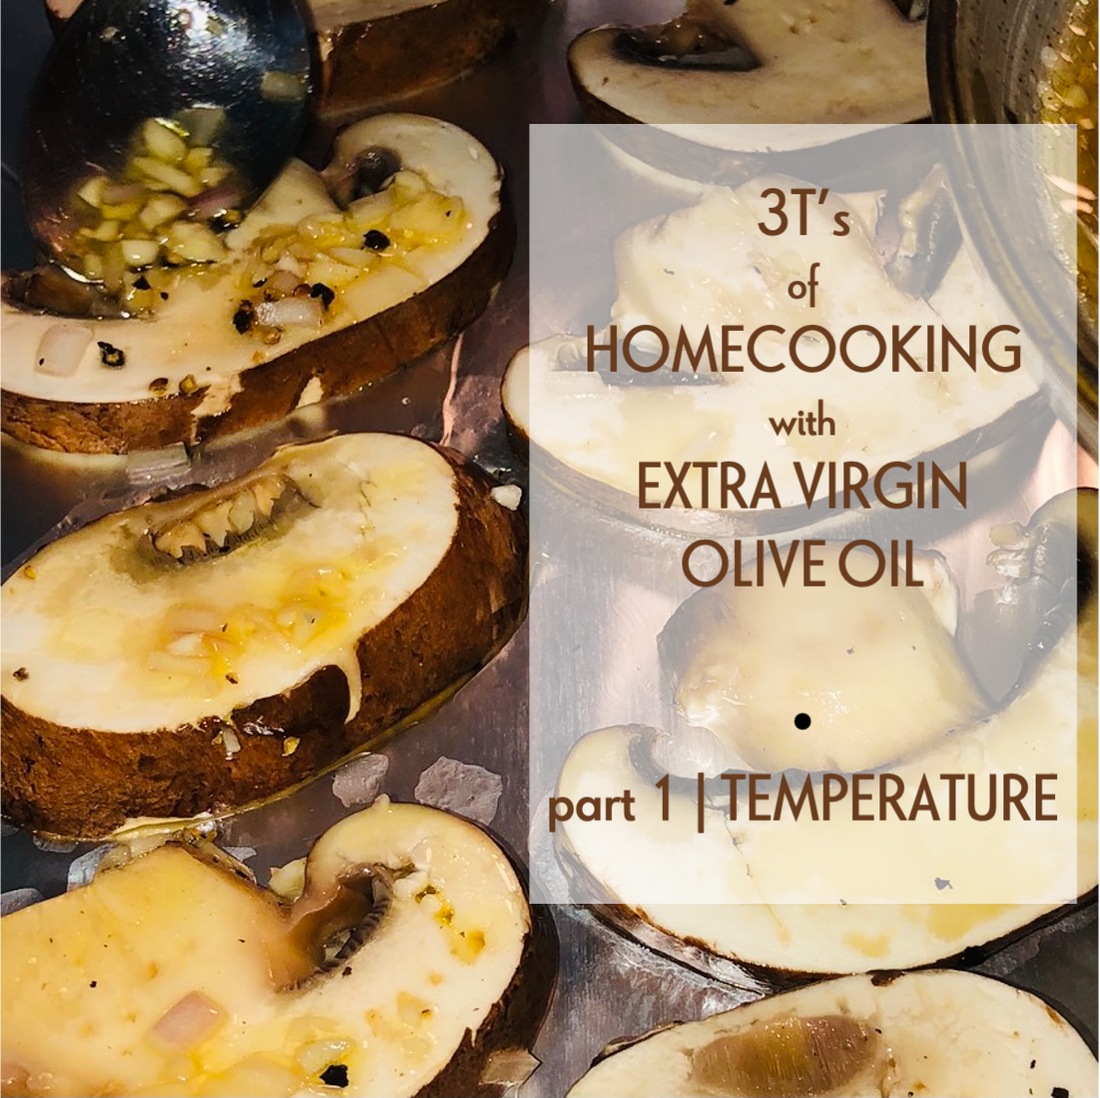 EVOO and temperature